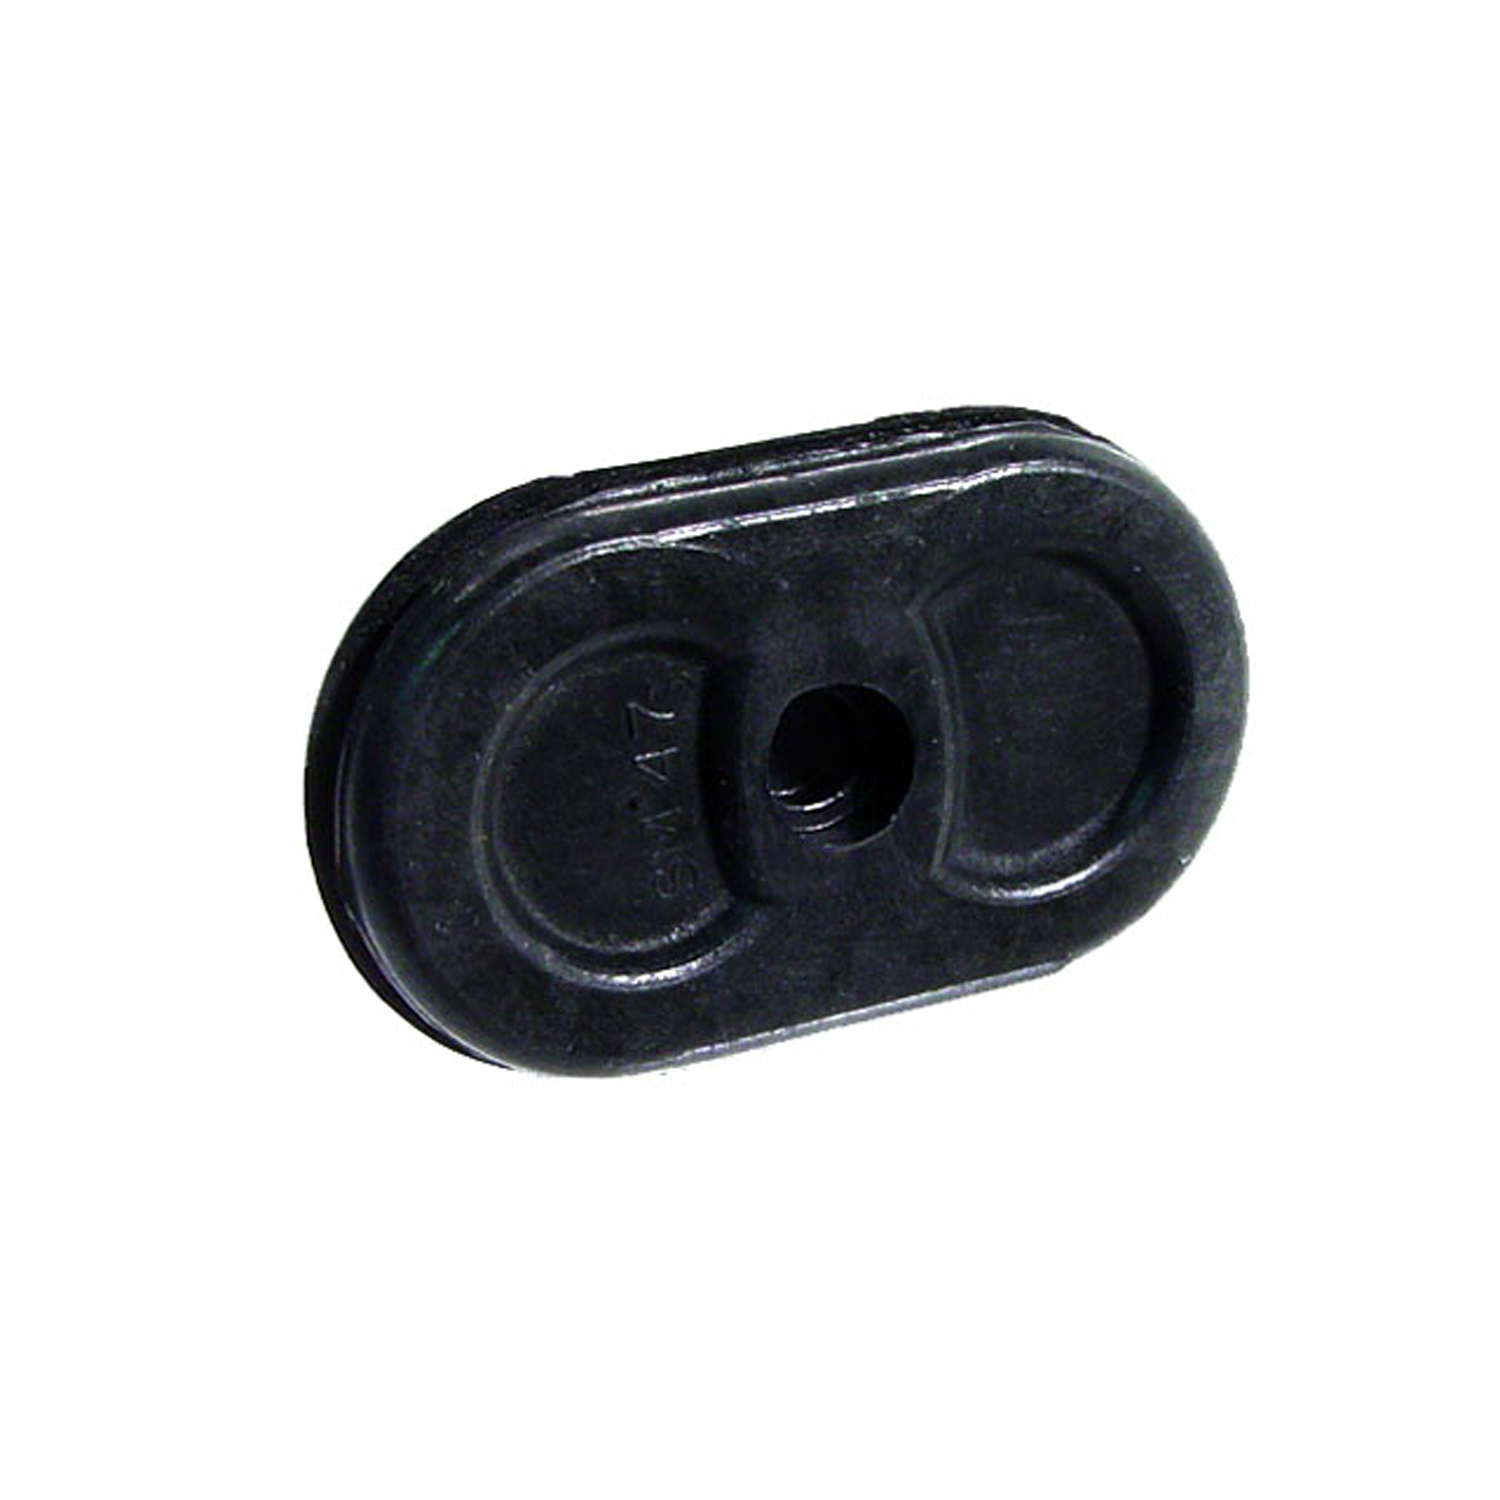 1942 Oldsmobile Special Speedometer Cable Firewall Grommet.  Fits 1-7/8 long hole-SM 47